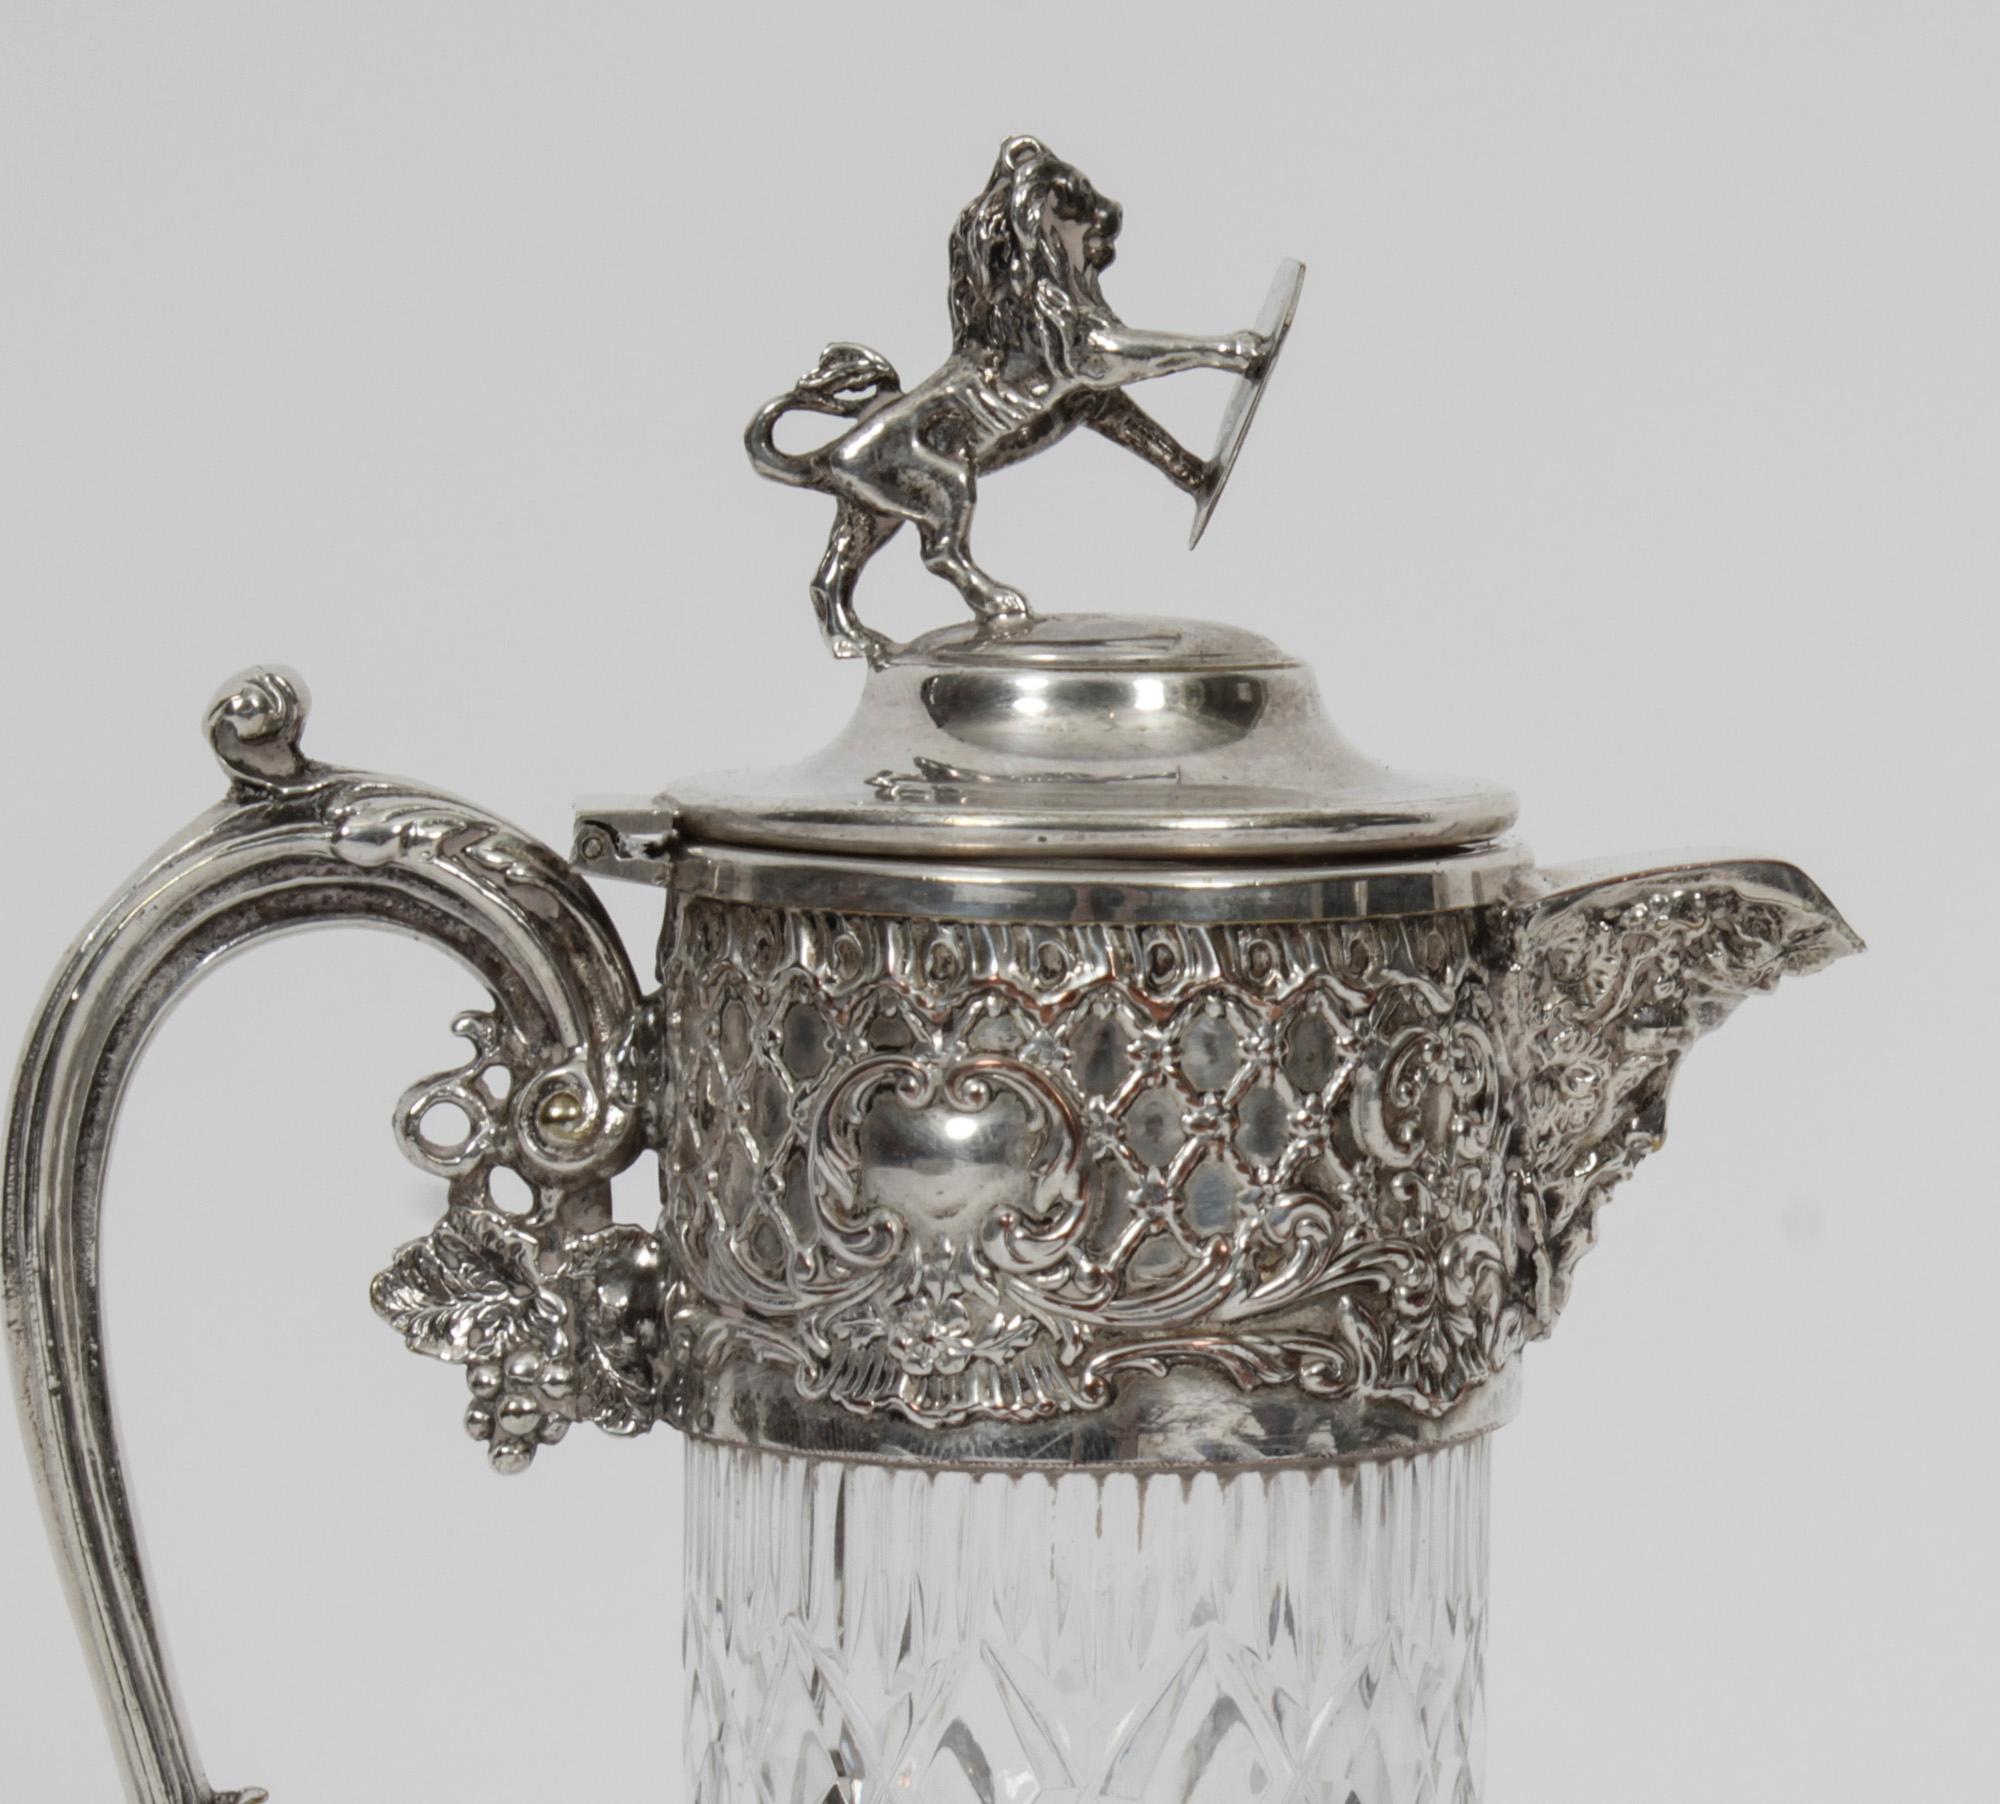 This is a wonderful antique victorian silver plated claret jug, circa 1870 in date

The claret jug has beautiful vinious decoration, a face mask spout, a hinged lid surmounted with a lion holding a shield and is silver plated on copper. 

The